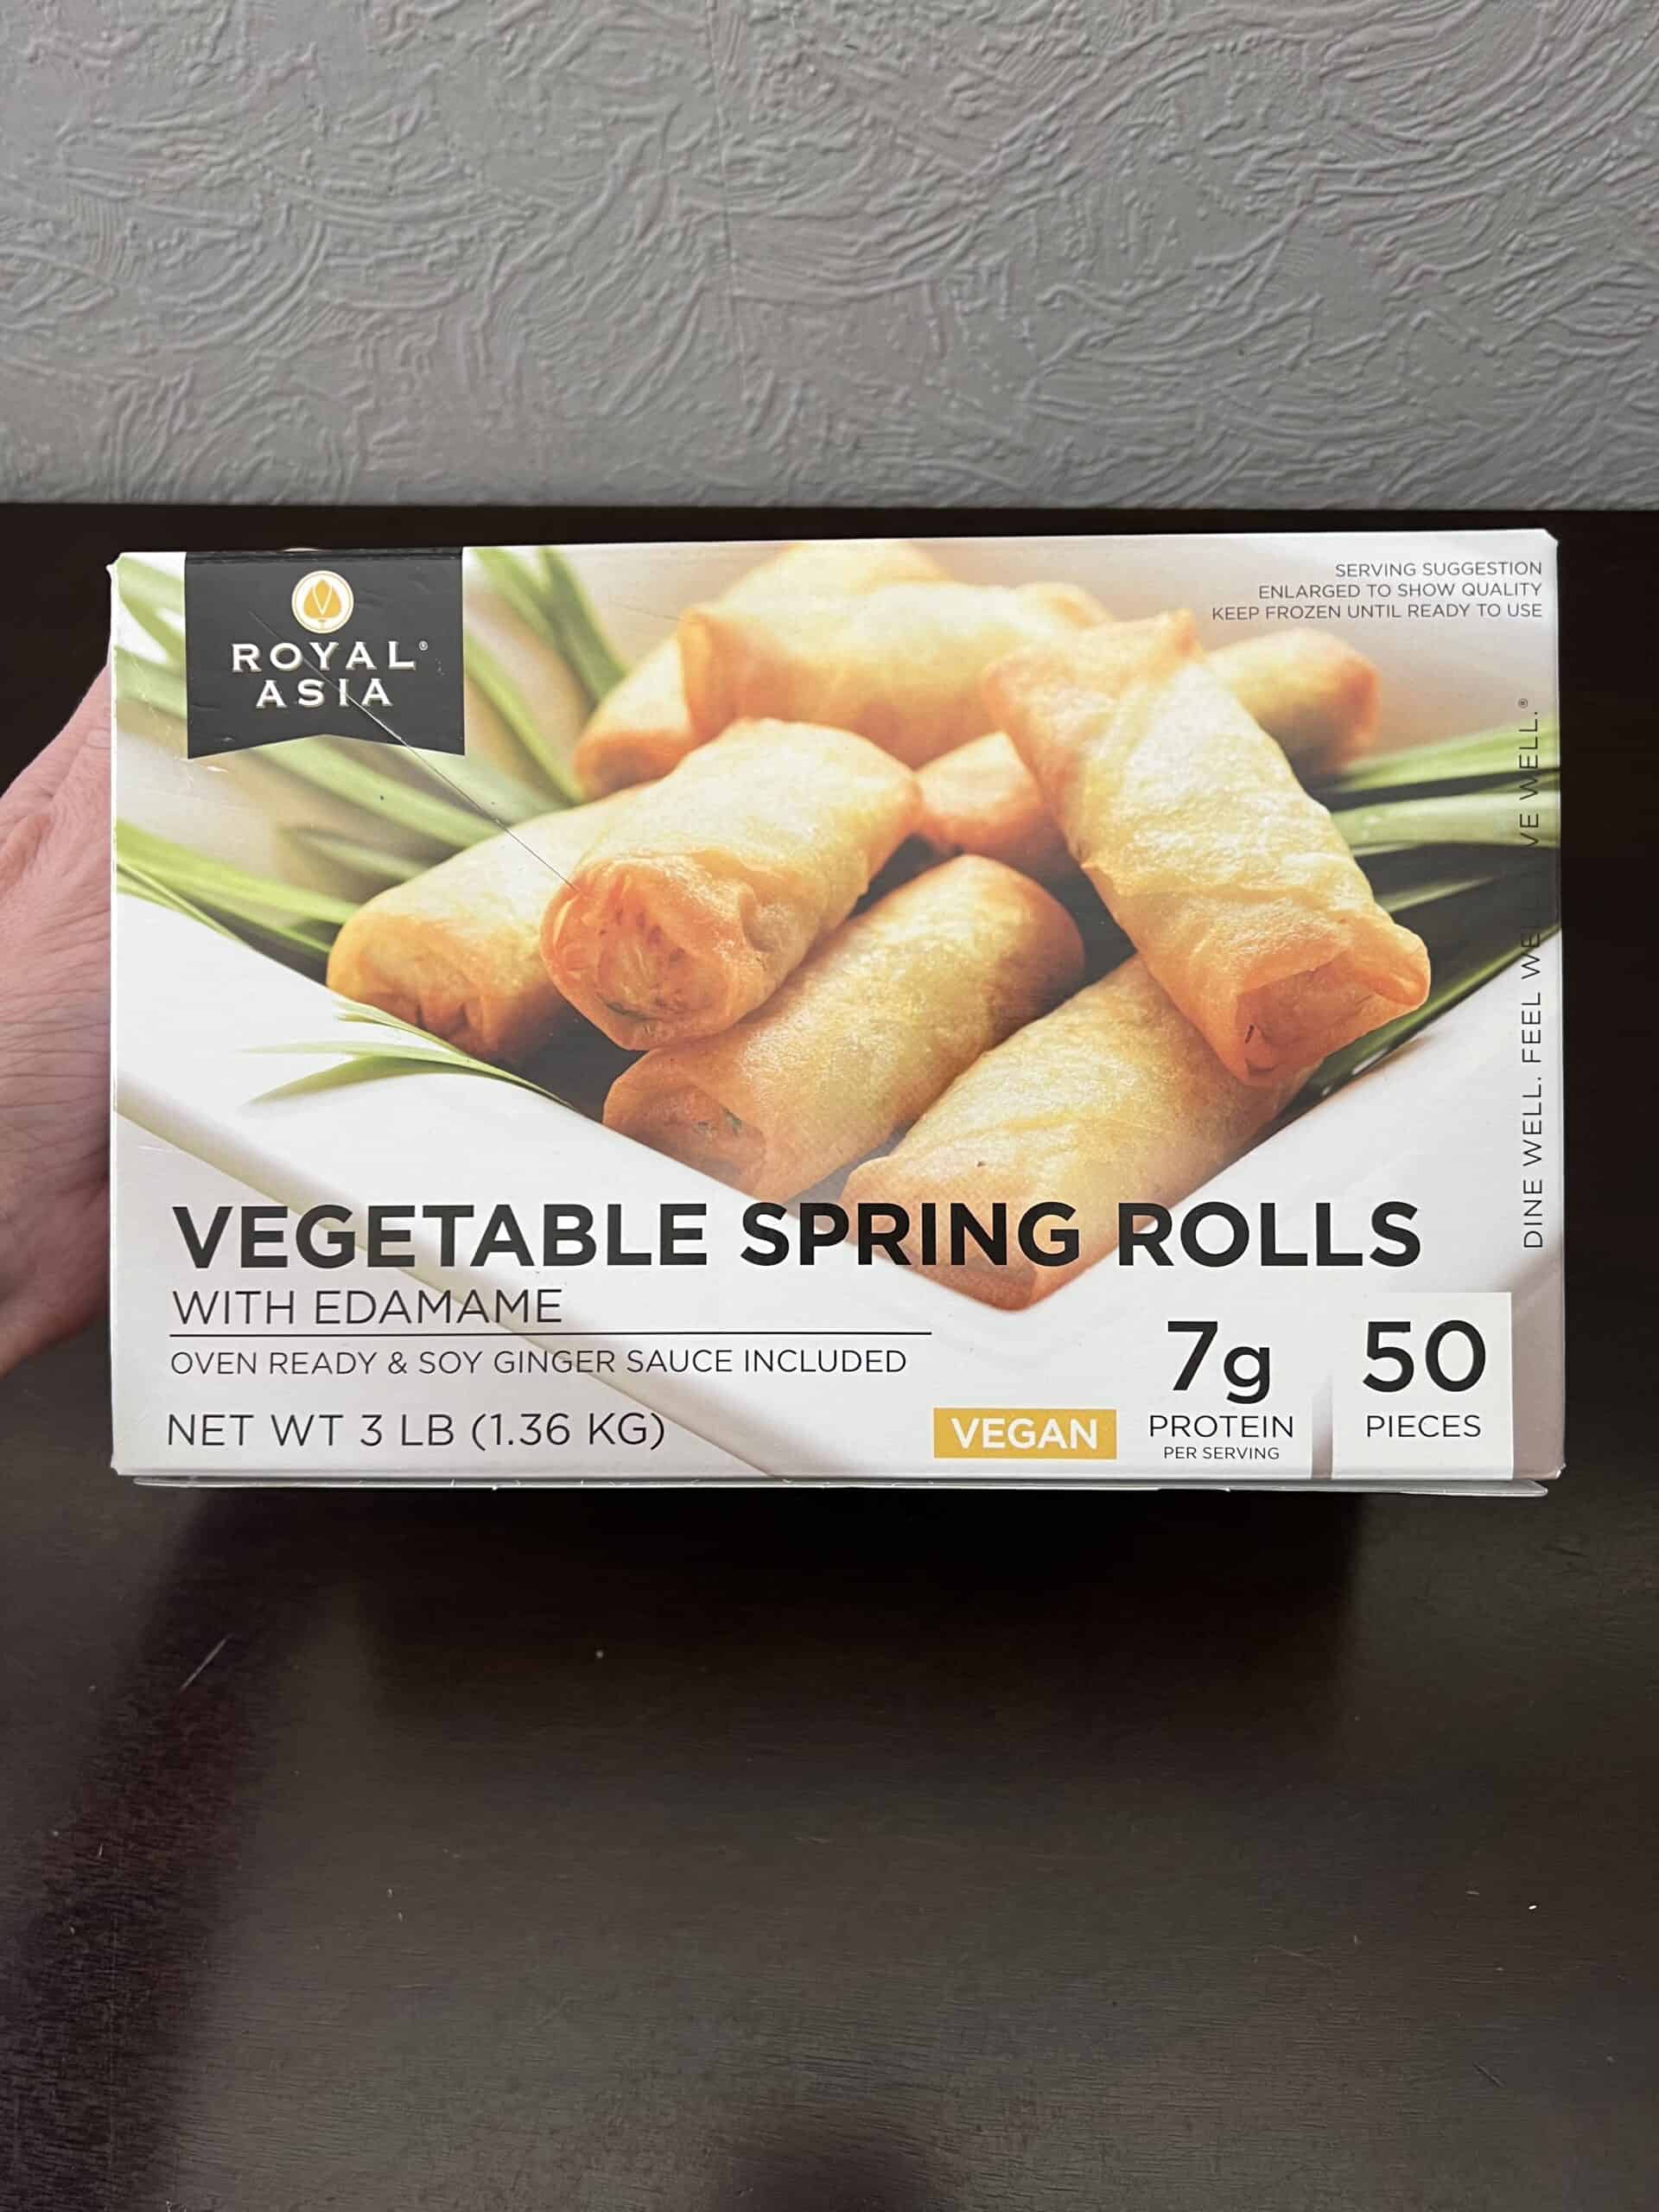 Frozen Royal Asia Vegetable Spring Rolls at Costco They are So Good